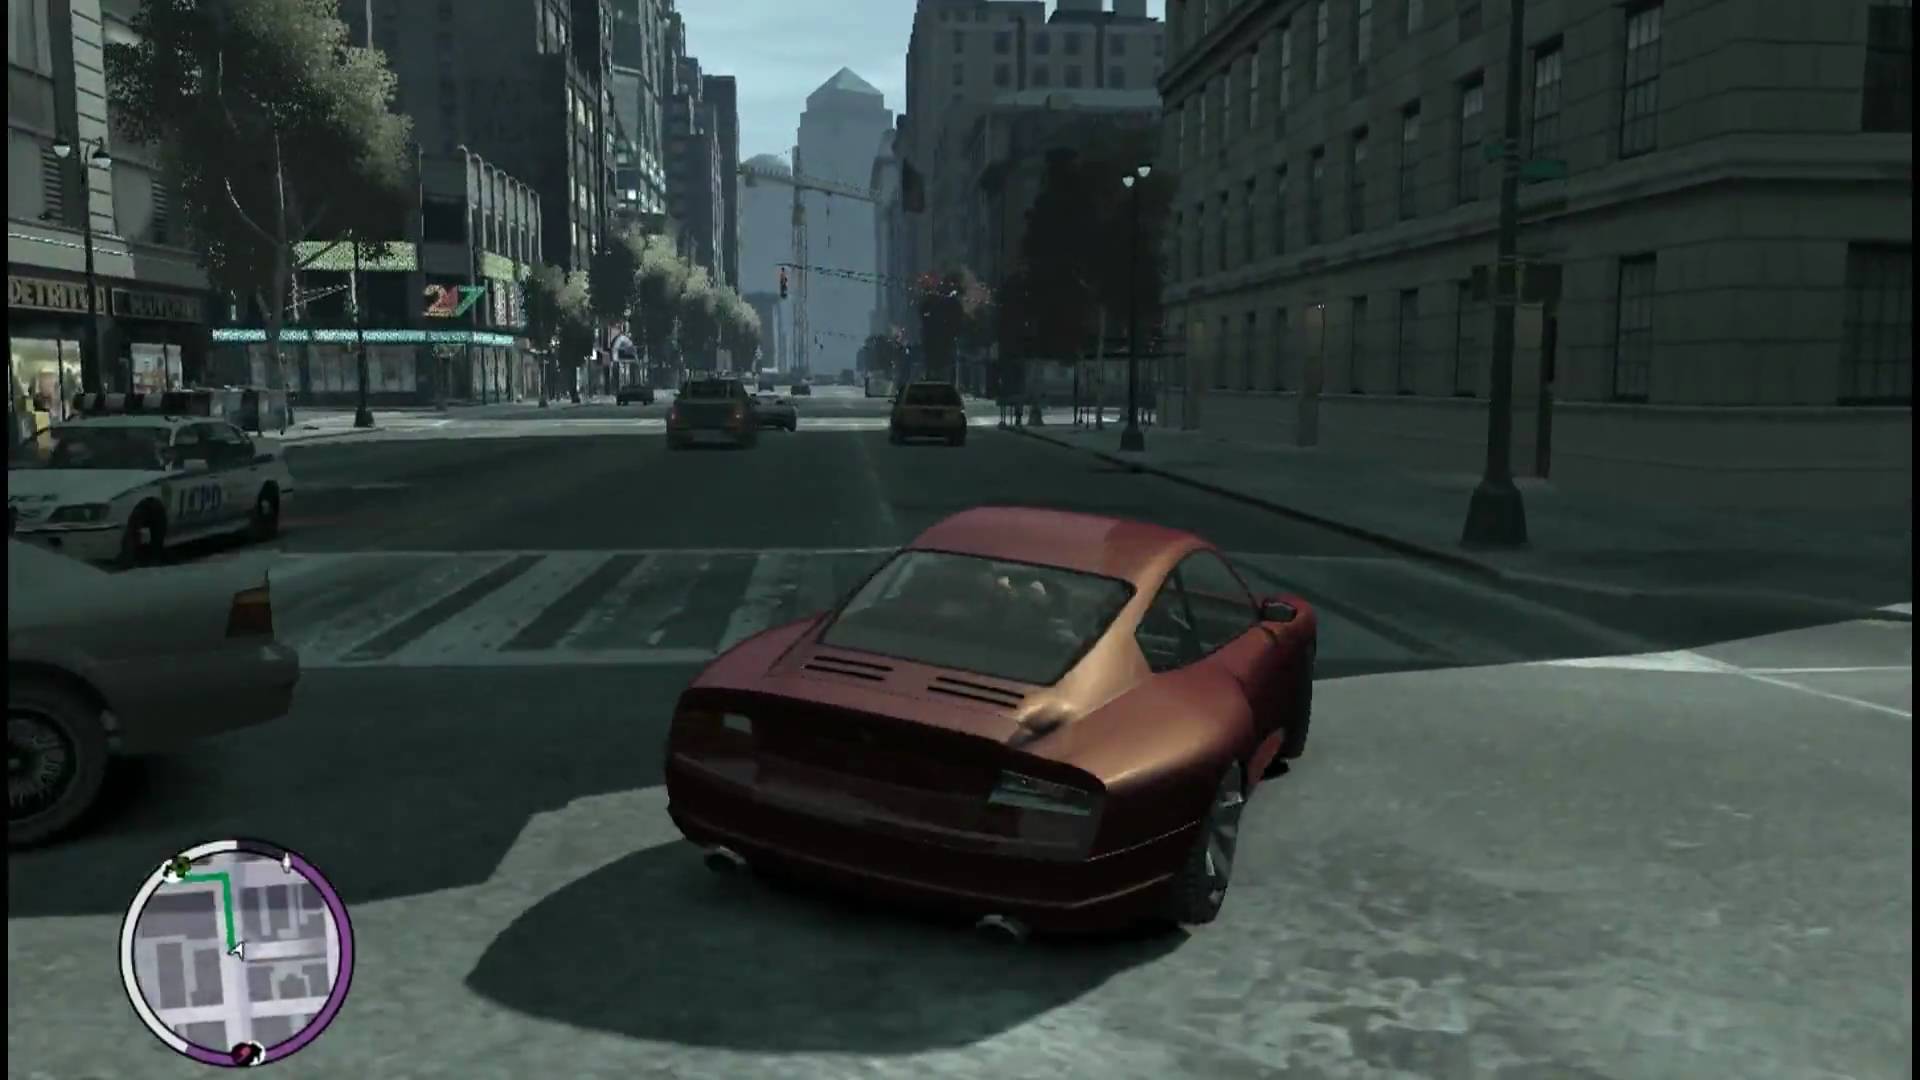 GTA episodes from liberty city